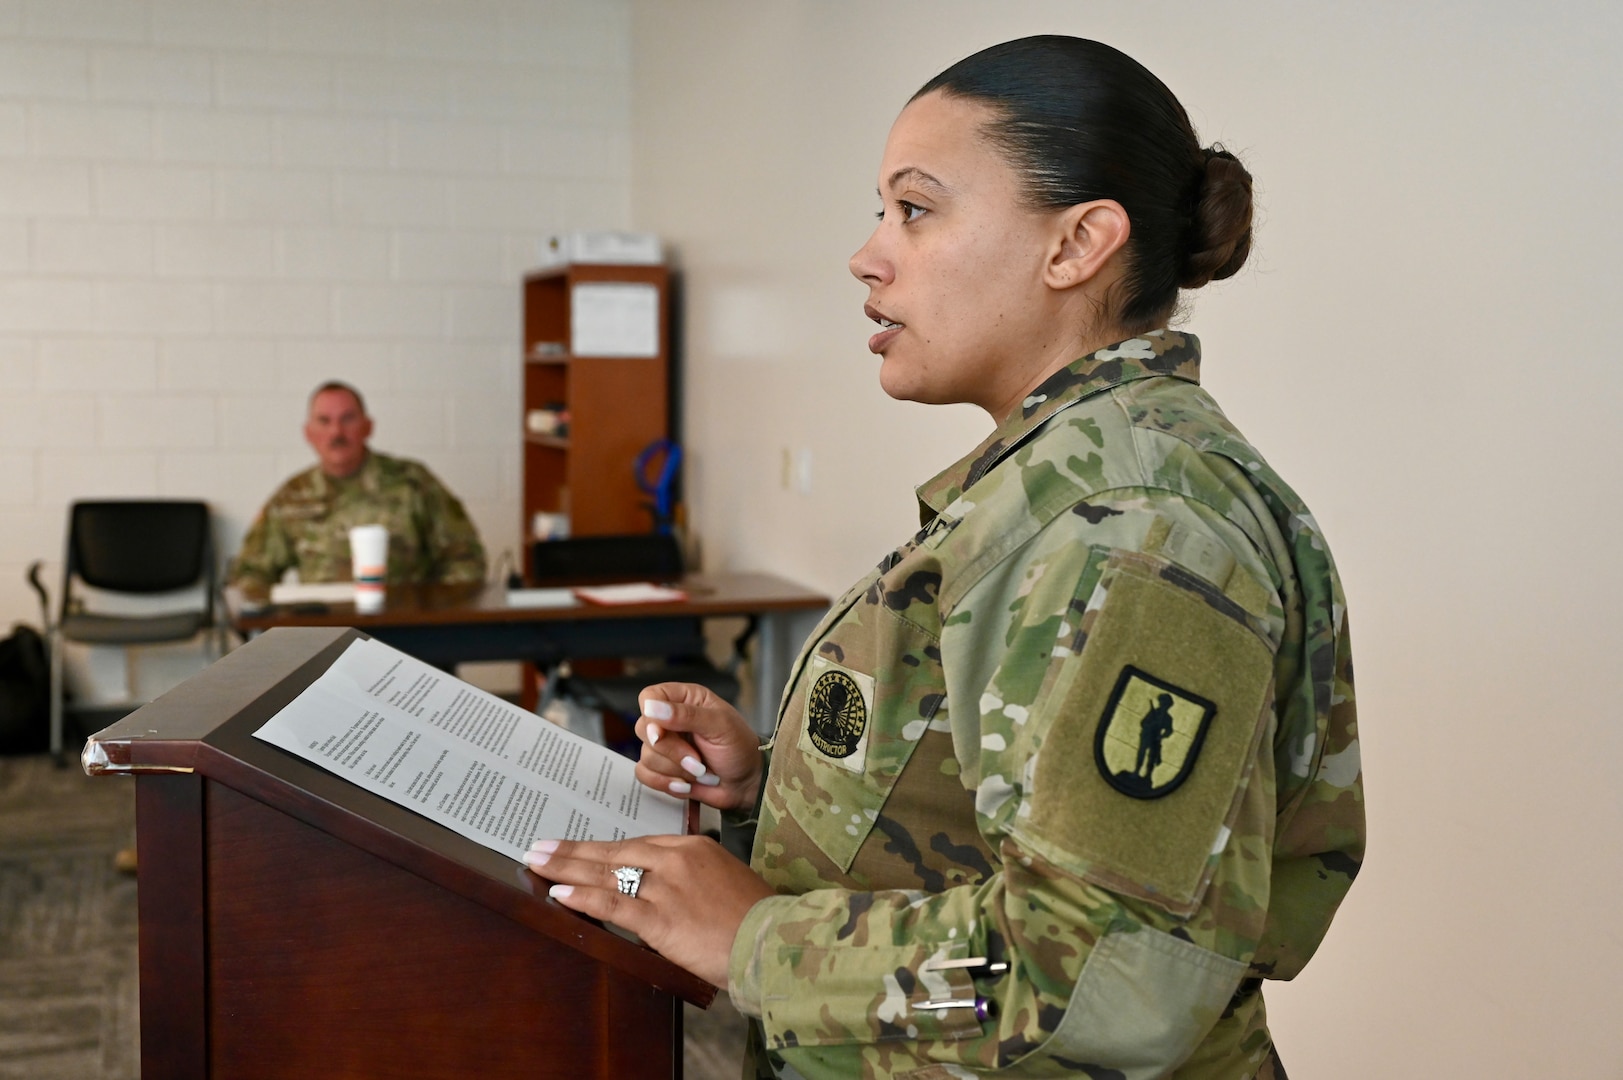 U.S. Army Master Sgt. Raven Carr, chief instructor, District of Columbia National Guard, facilitates a component of the Common Faculty Development-Instructor Course (CFD-IC) at the D.C. National Guard’s 260th Regiment Regional Training Institute (RTI) at Fort Belvoir, Va., March 15, 2024. The course teaches new instructors, trainers, and facilitators how to build lesson plans and effectively reach their intended audience.